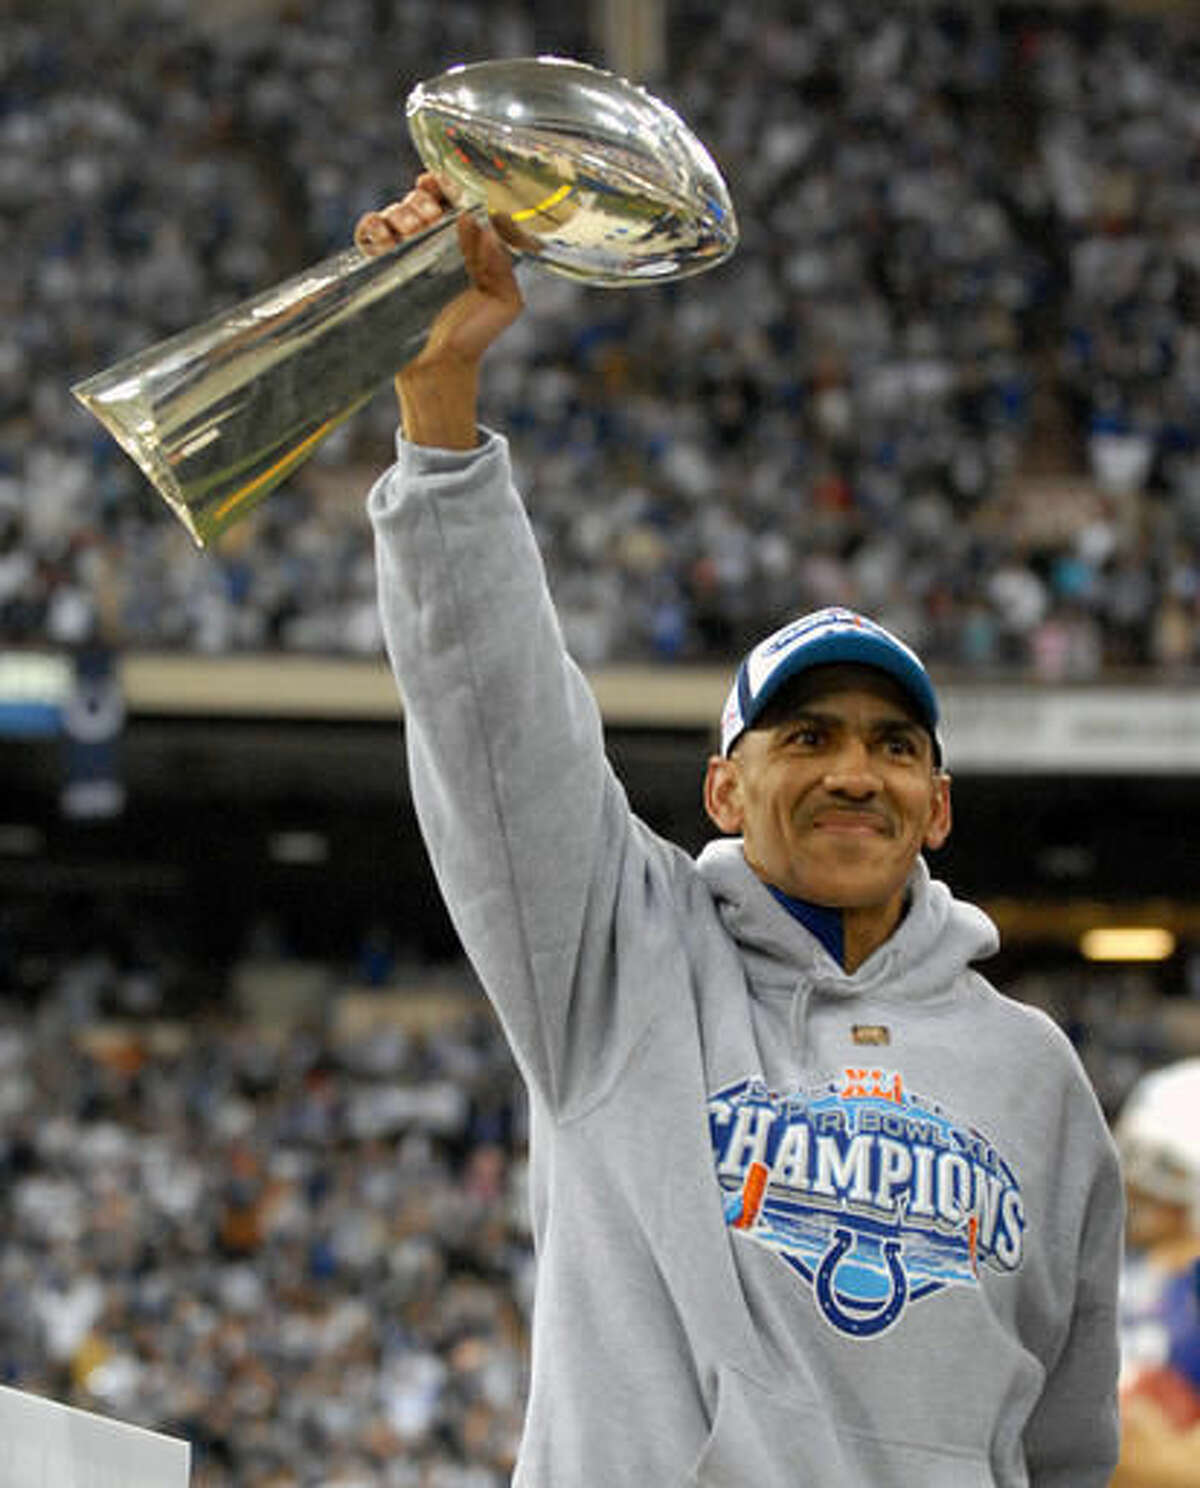 FILE - In this Feb. 5, 2007, file photo, Indianapolis Colts coach Tony Dungy acknowledging fans at a Super Bowl Rally at the RCA Dome in Indianapolis. The Colts beat the Chicago Bears, 29-17, in Super Bowl XLI. The soft-spoken Dungy, who will be inducted into the Pro Football Hall of Fame on Saturday, Aug. 6, 2016. (AP Photo/Tom Strickland, File)